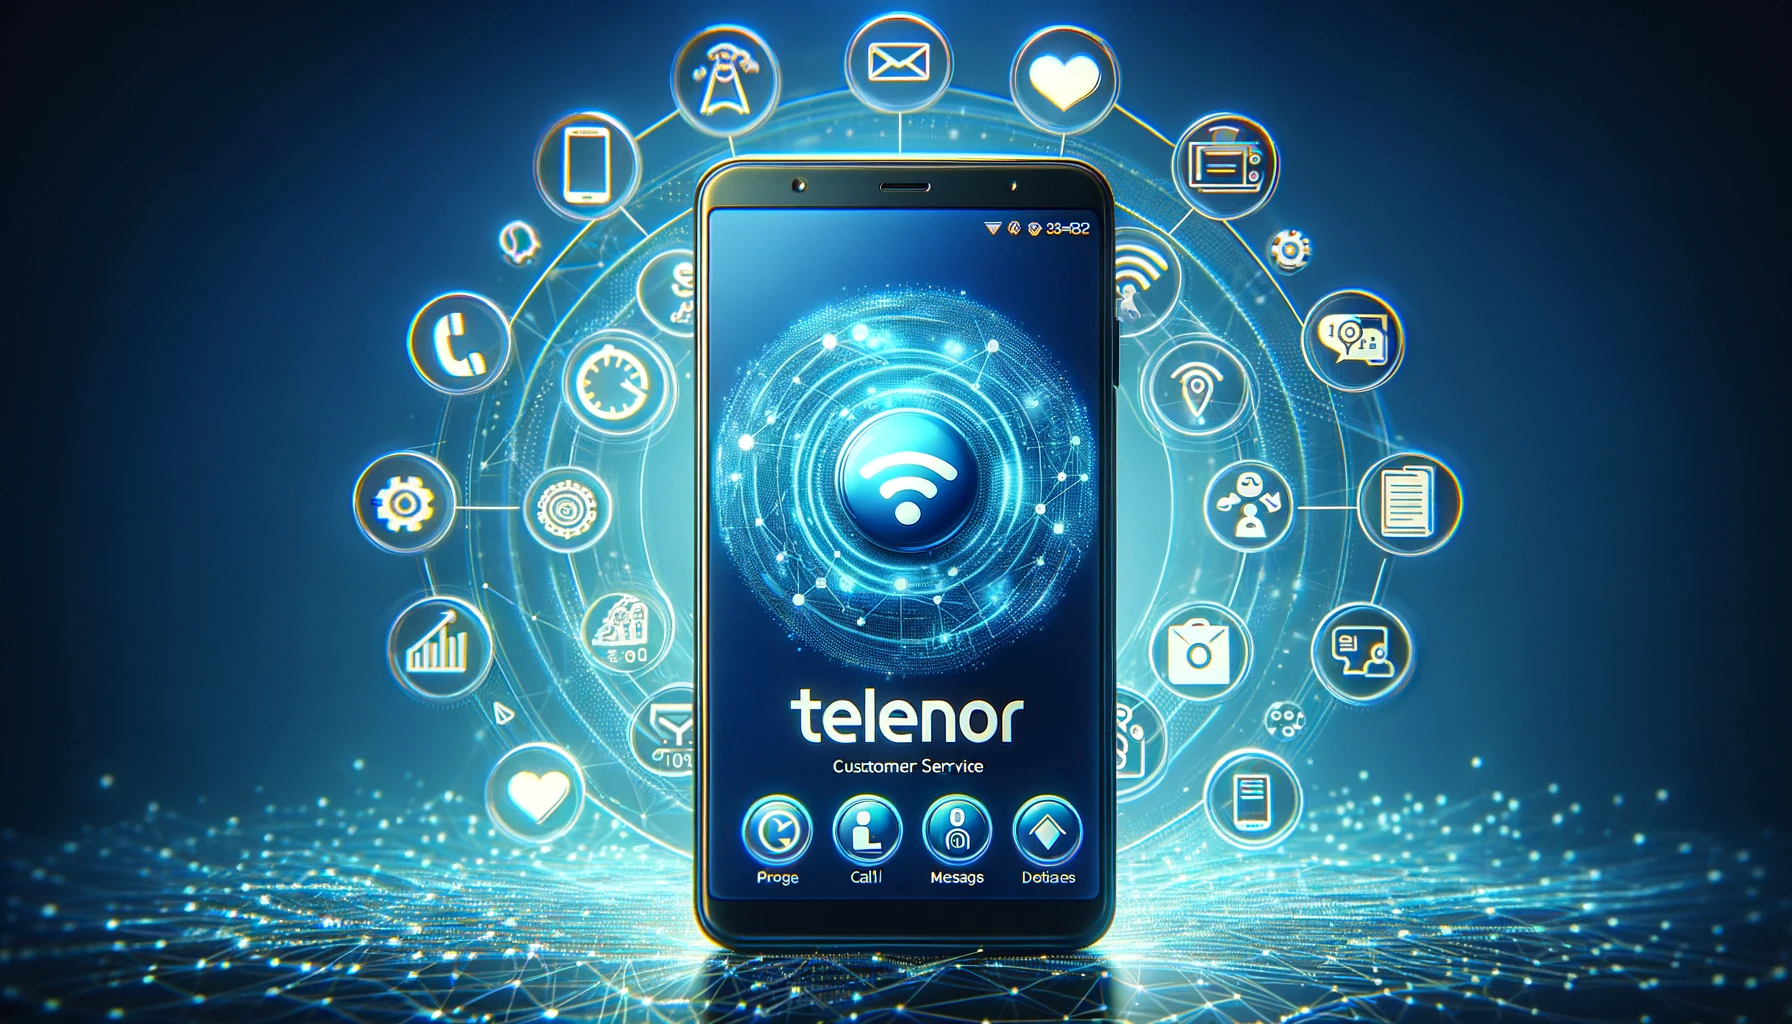 How to Find Your Telenor Number Code